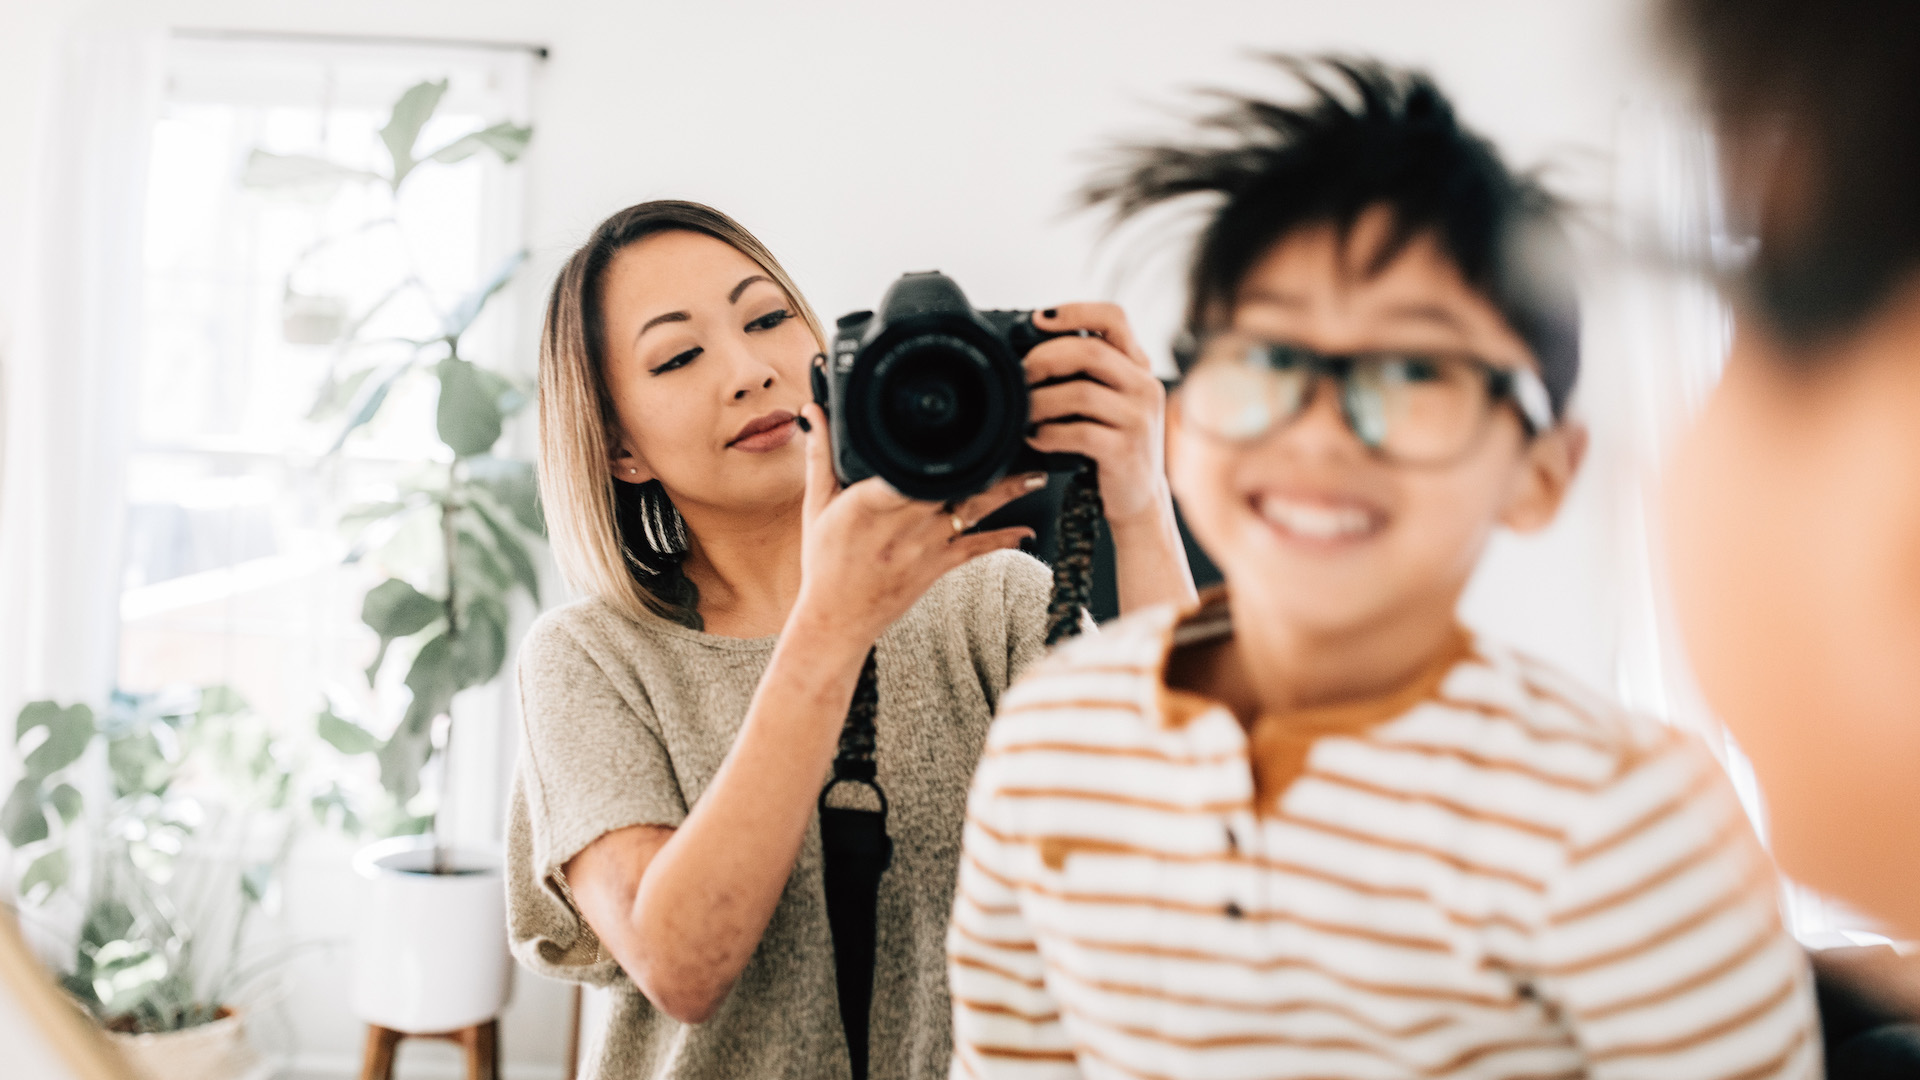 Candid family portraits (and tips for shooting at home)